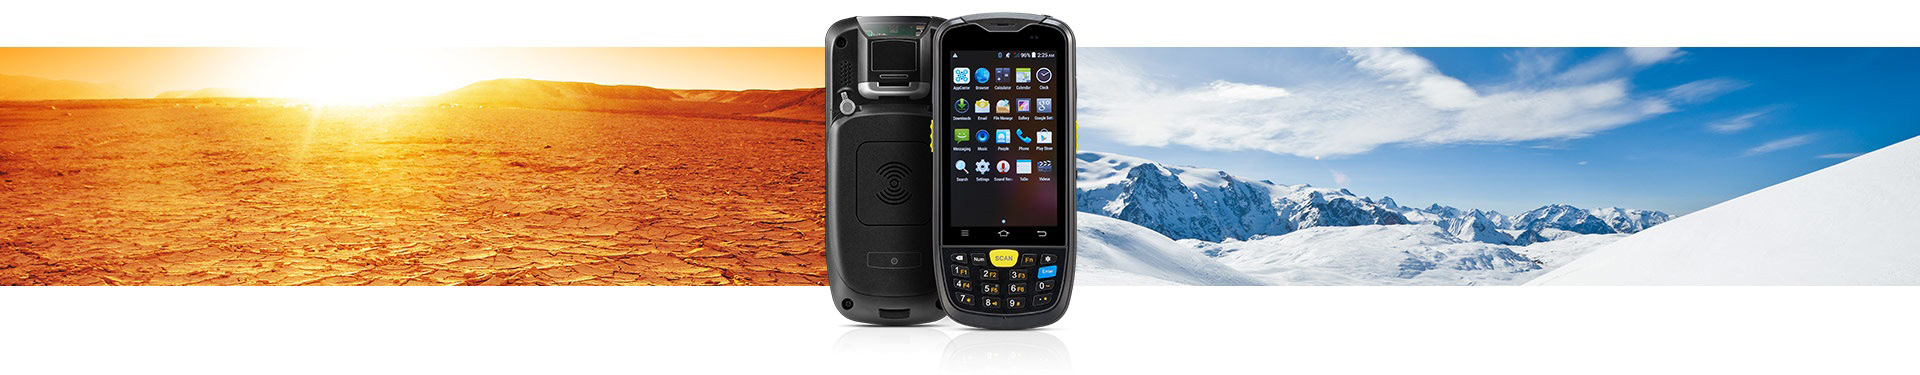 Rugged Handheld Android